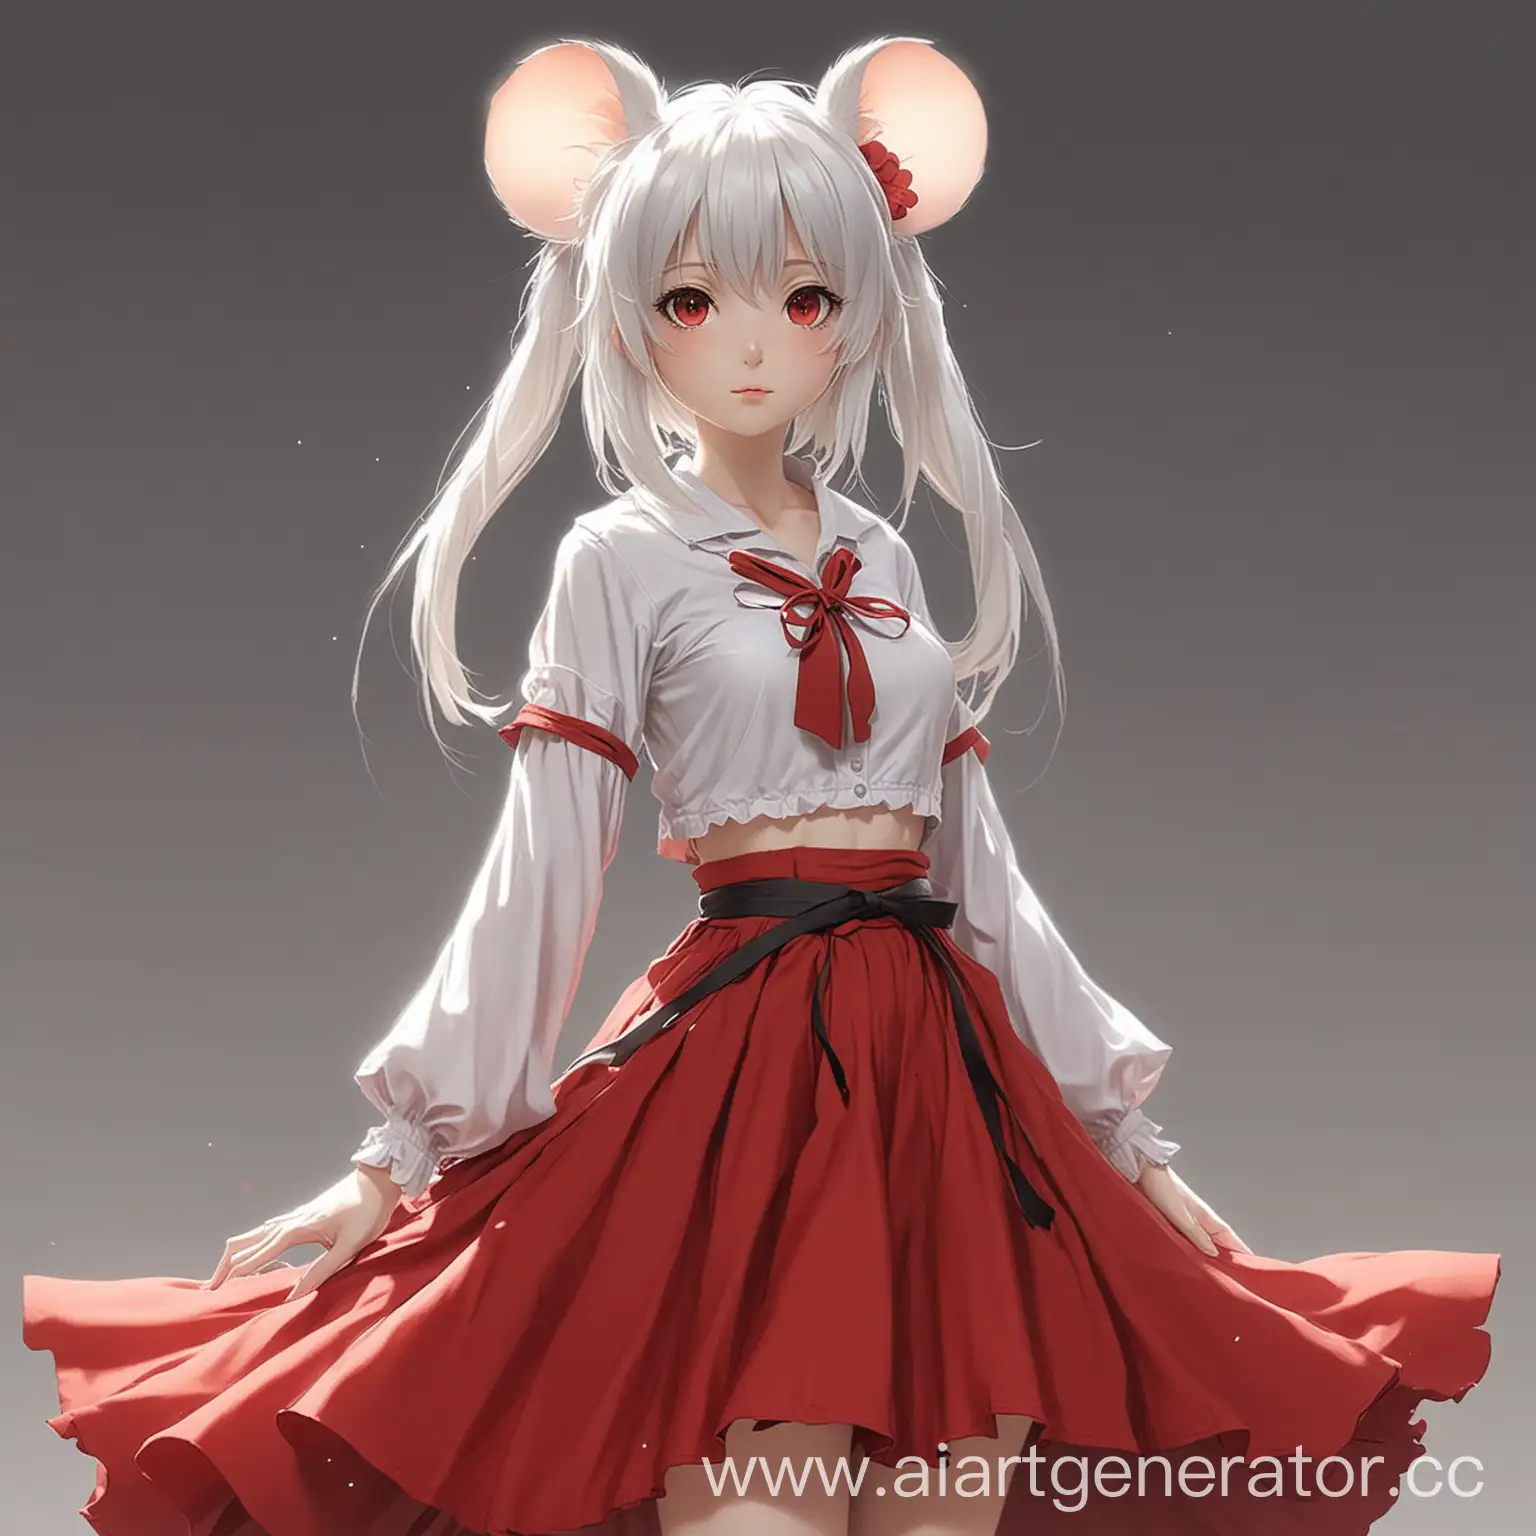 Anime-Mouse-Girl-with-White-Hair-in-Red-Long-Skirt